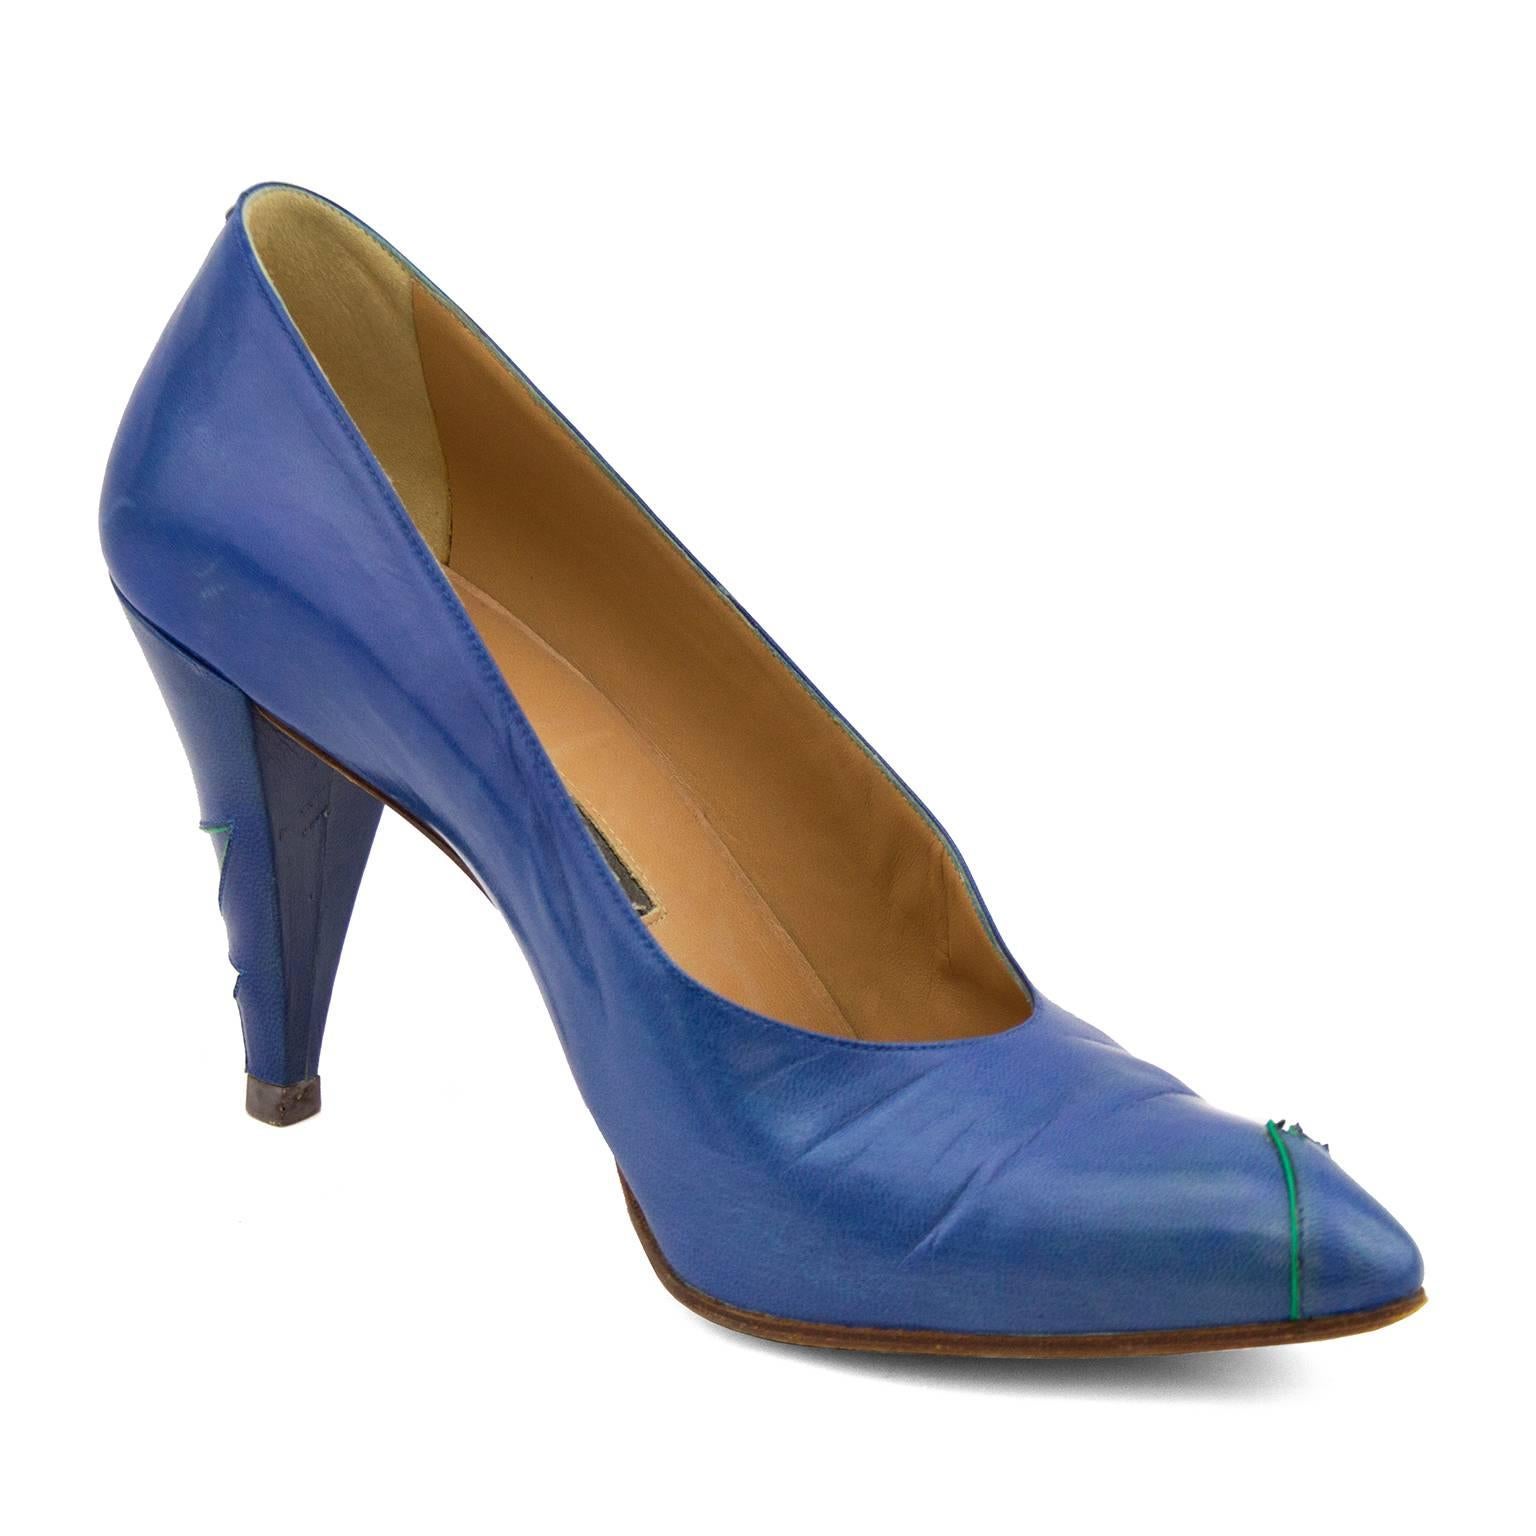 1980s Maude Frizon blue leather pumps with thin green lightening bolt zigzag detail. Almond shaped toe and leather covered heel are accented with a green leather piped zigzag. In excellent condition with slight signs of wear to the soles. Marked FR